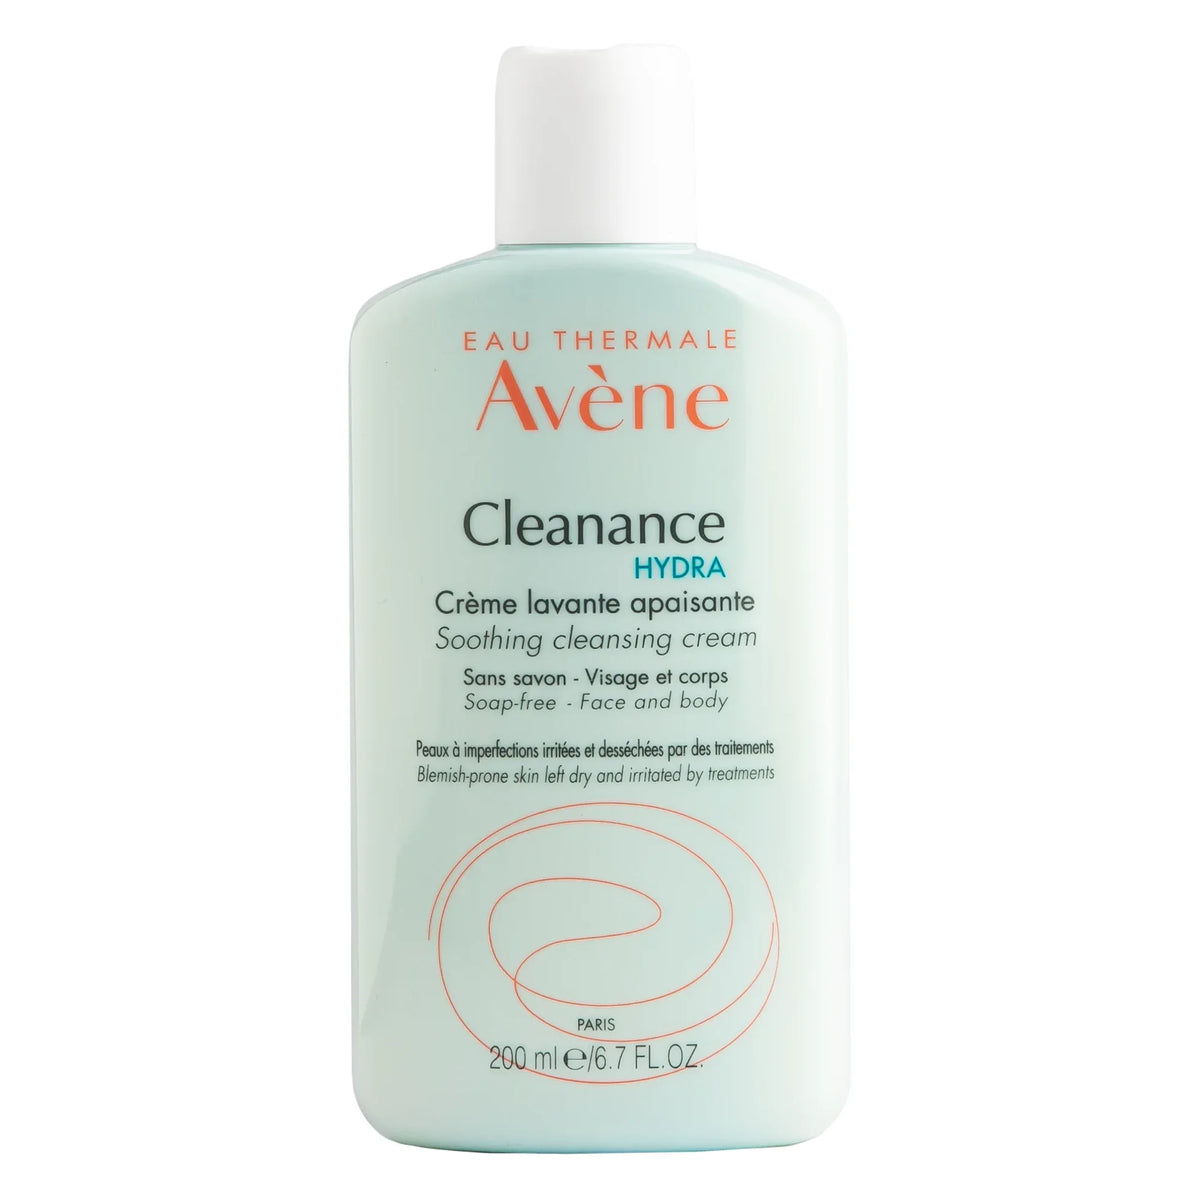 Cleanance Hydra Soothing Cleansing Cream